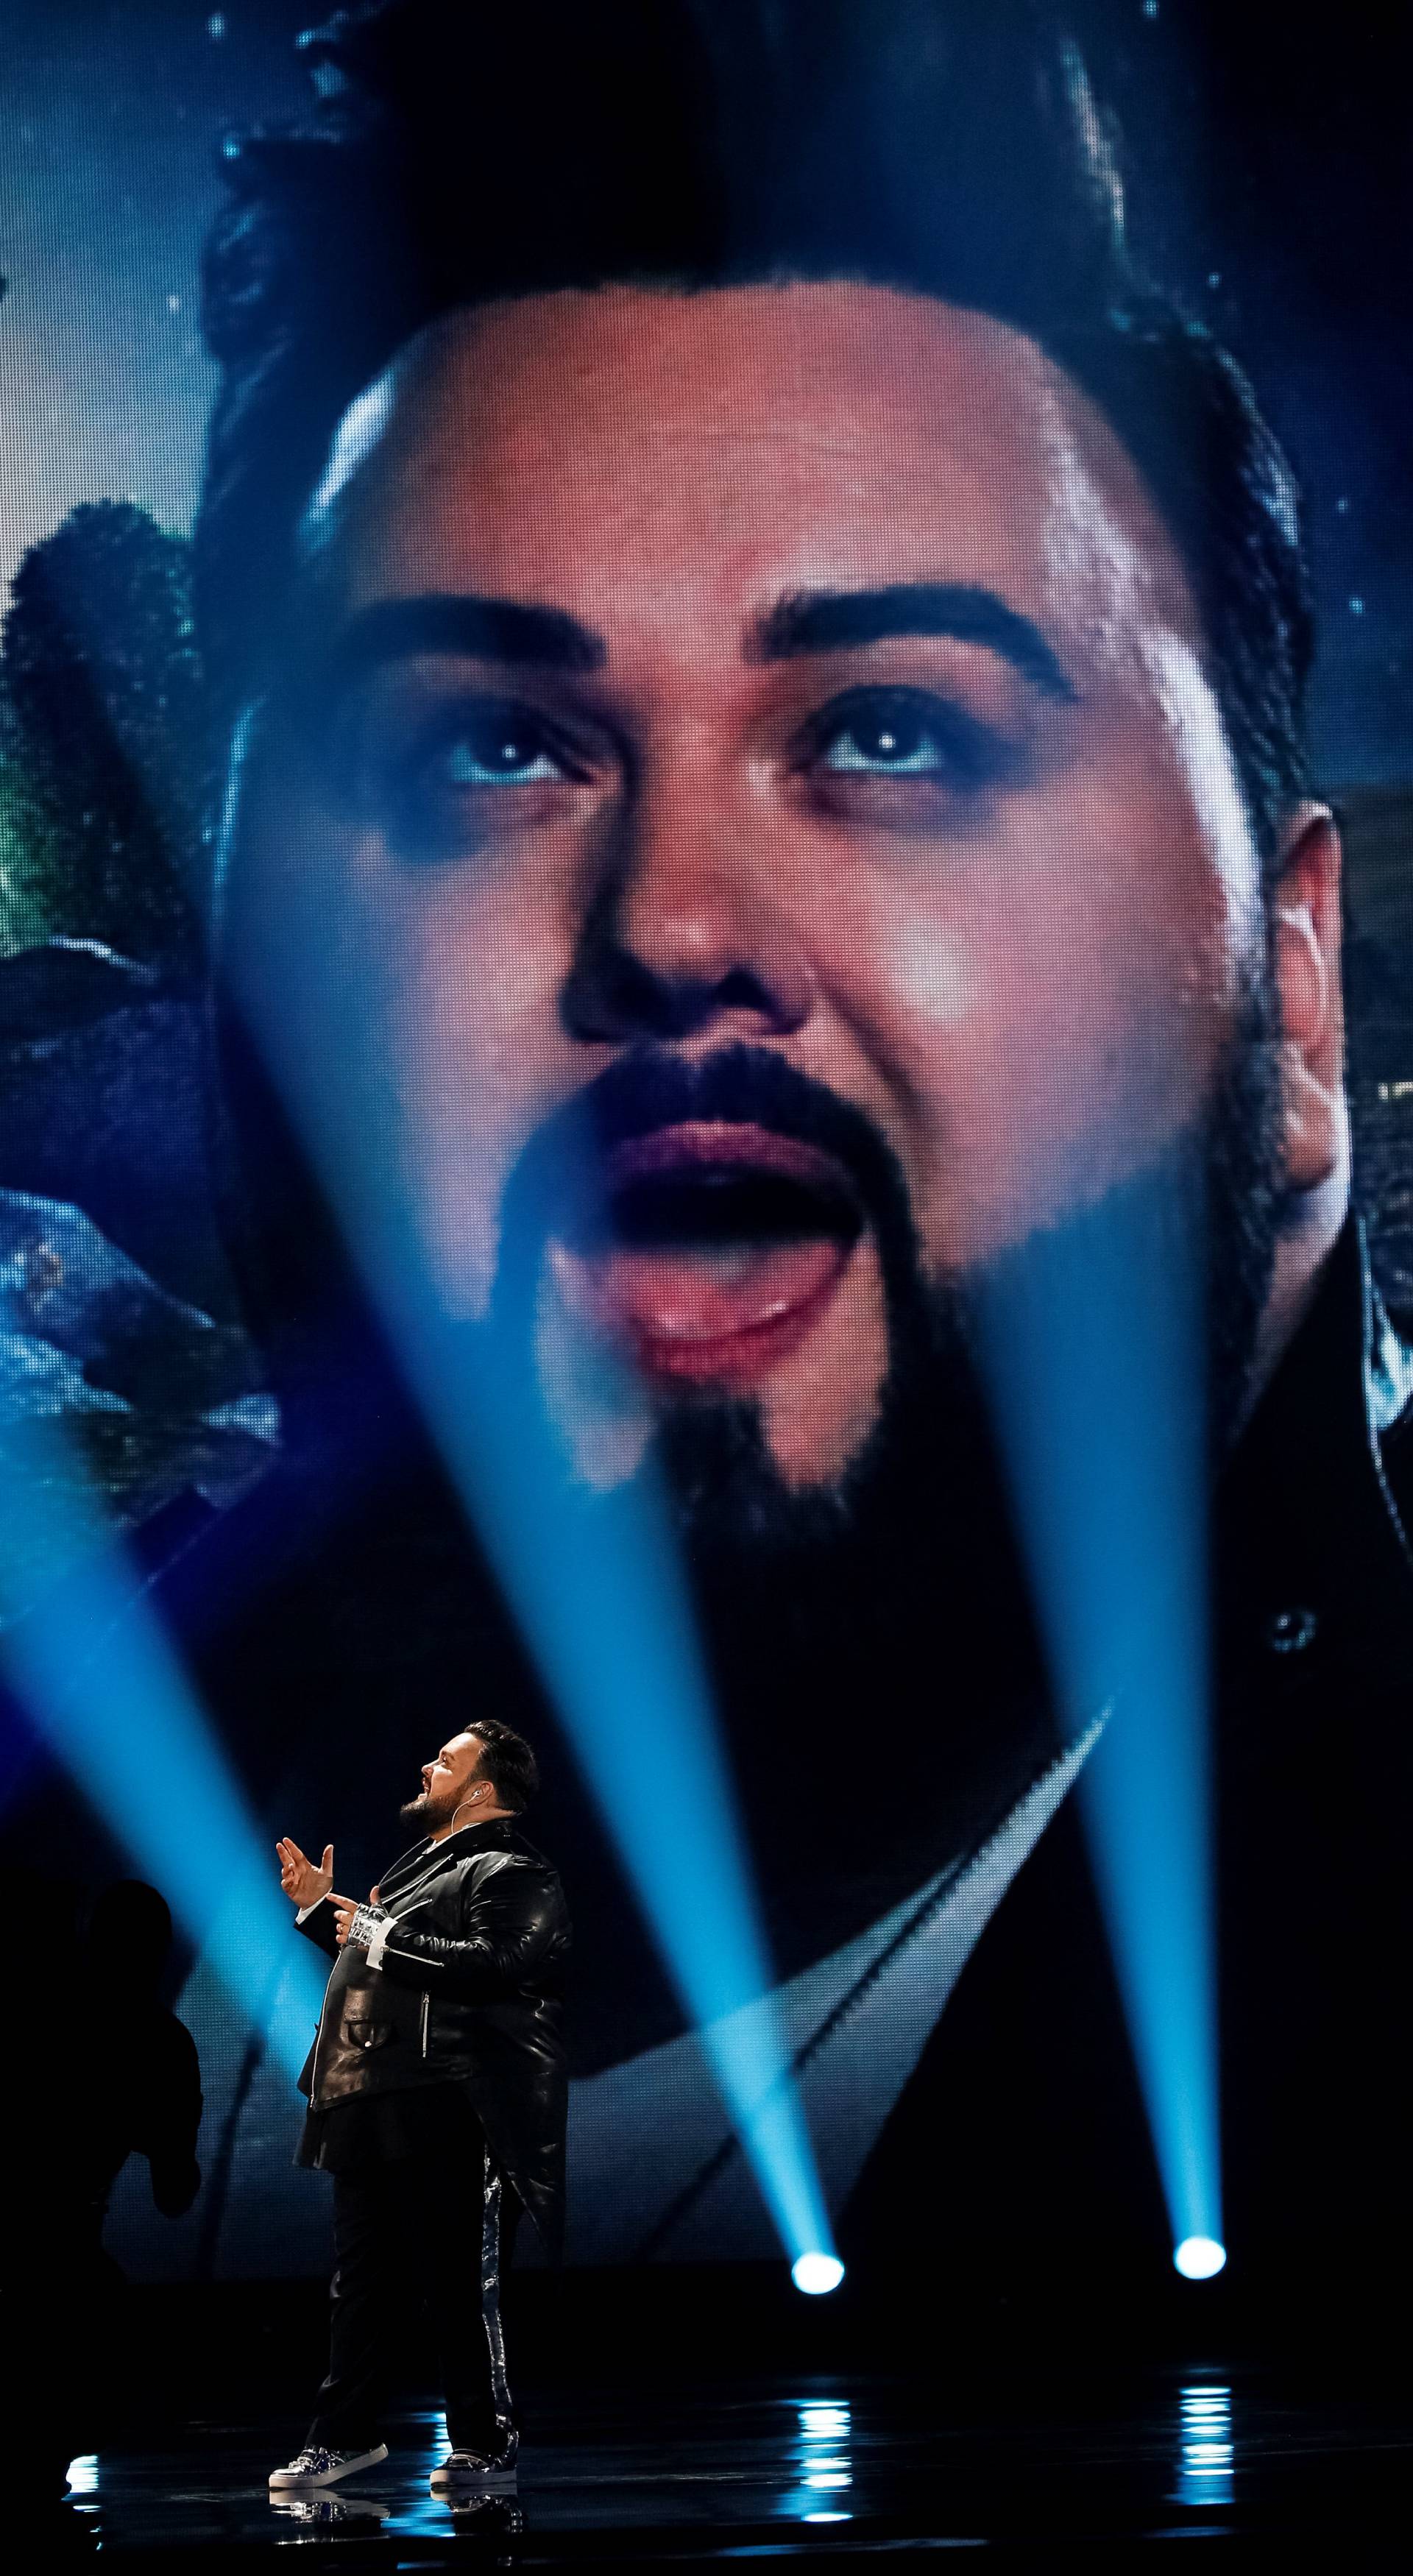 Croatia's Jacques Houdek performs with the song "My Friend" during the Eurovision Song Contest 2017 Grand Final Dress rehearsal 1 at the International Exhibition Centre in Kiev